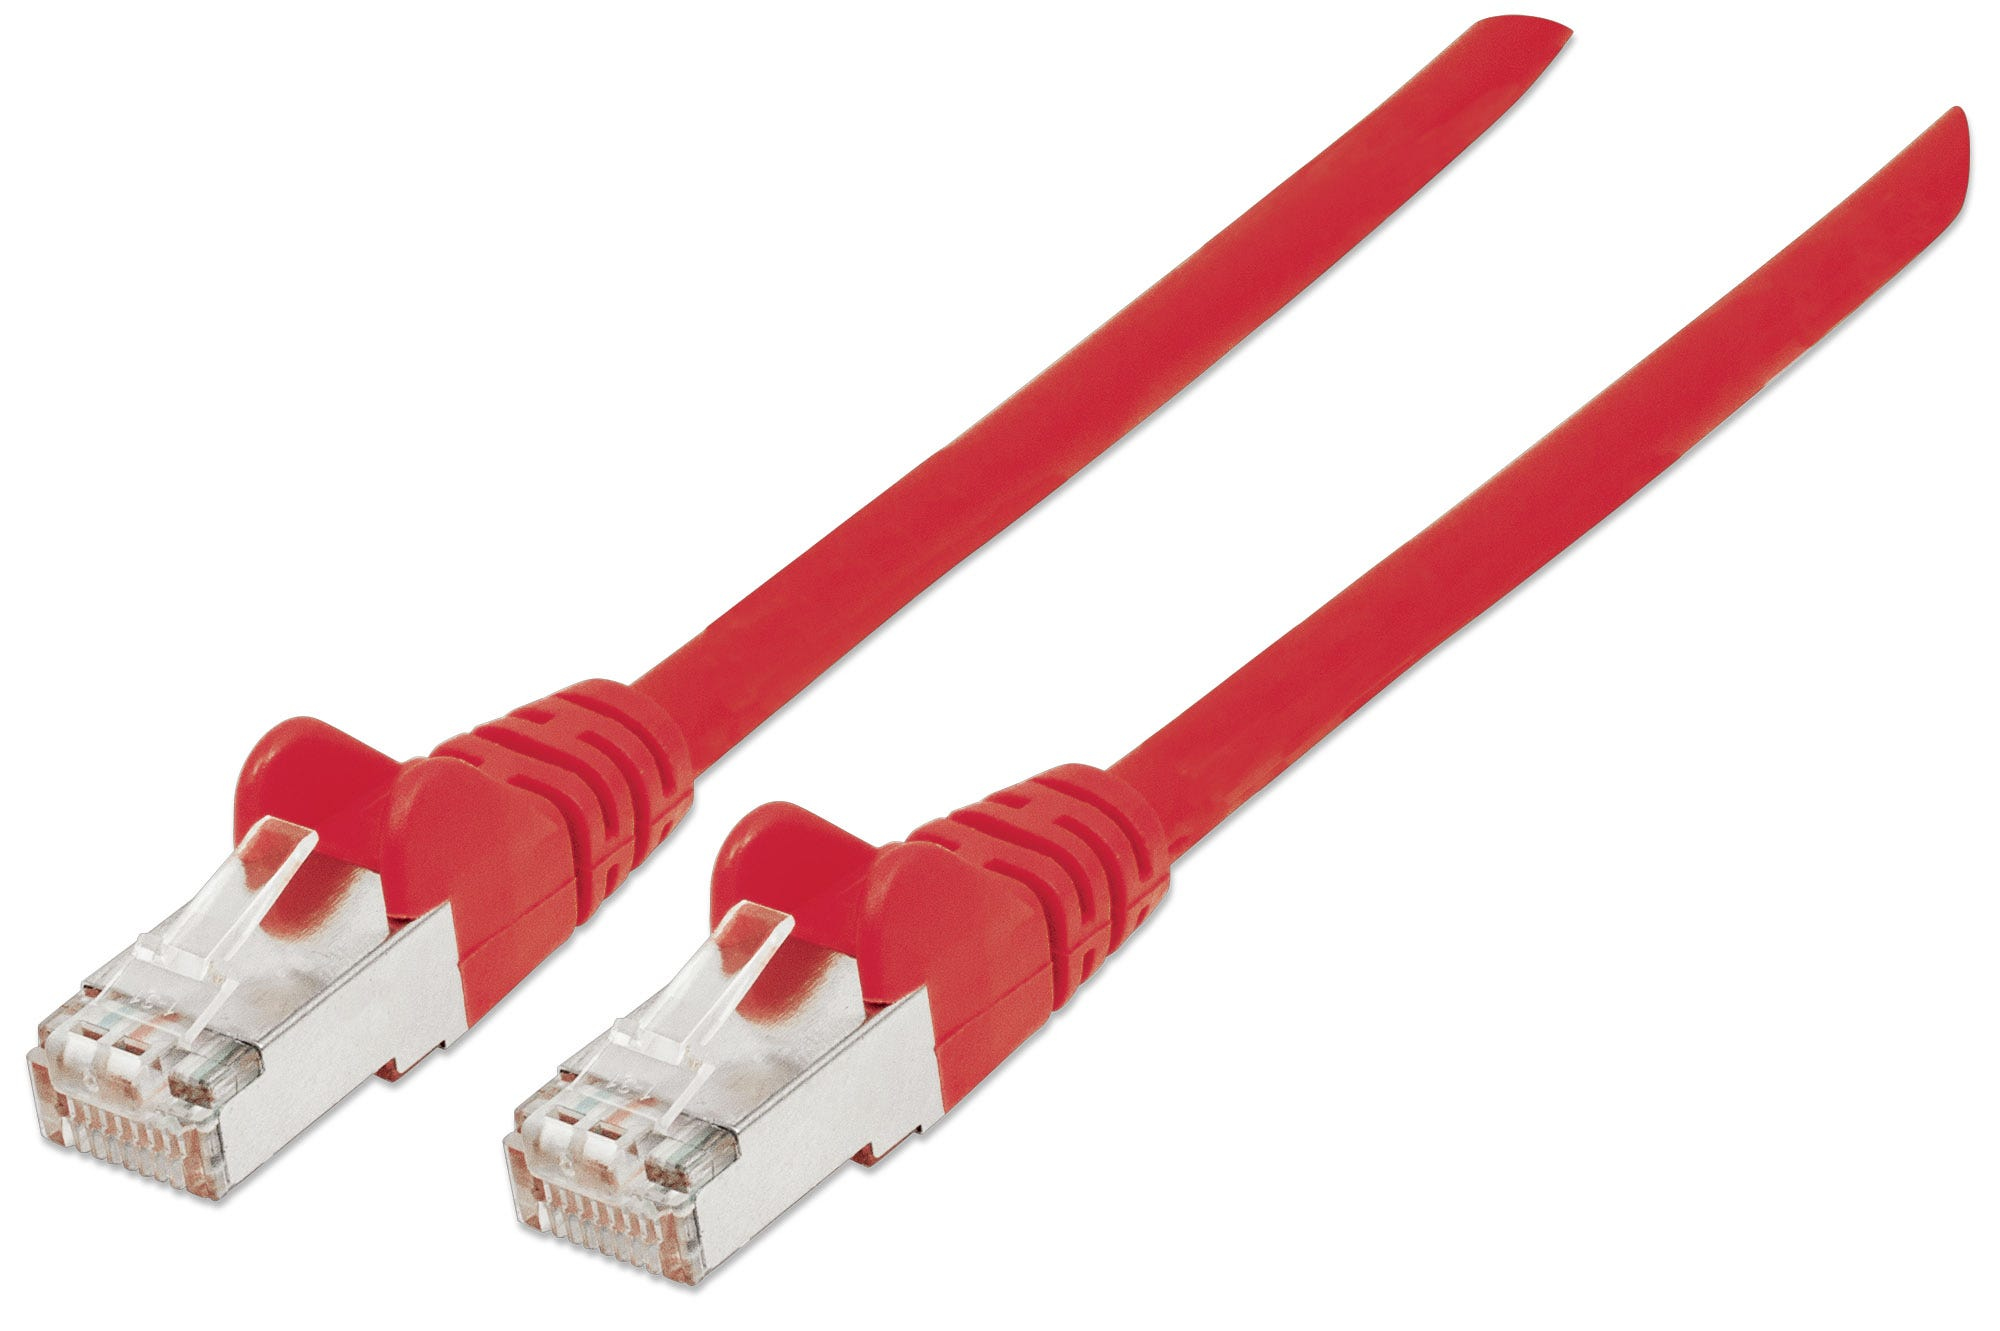 Photos - Cable (video, audio, USB) INTELLINET Network Patch Cable, Cat6A, 2m, Red, Copper, S/FTP, LSOH / 3190 